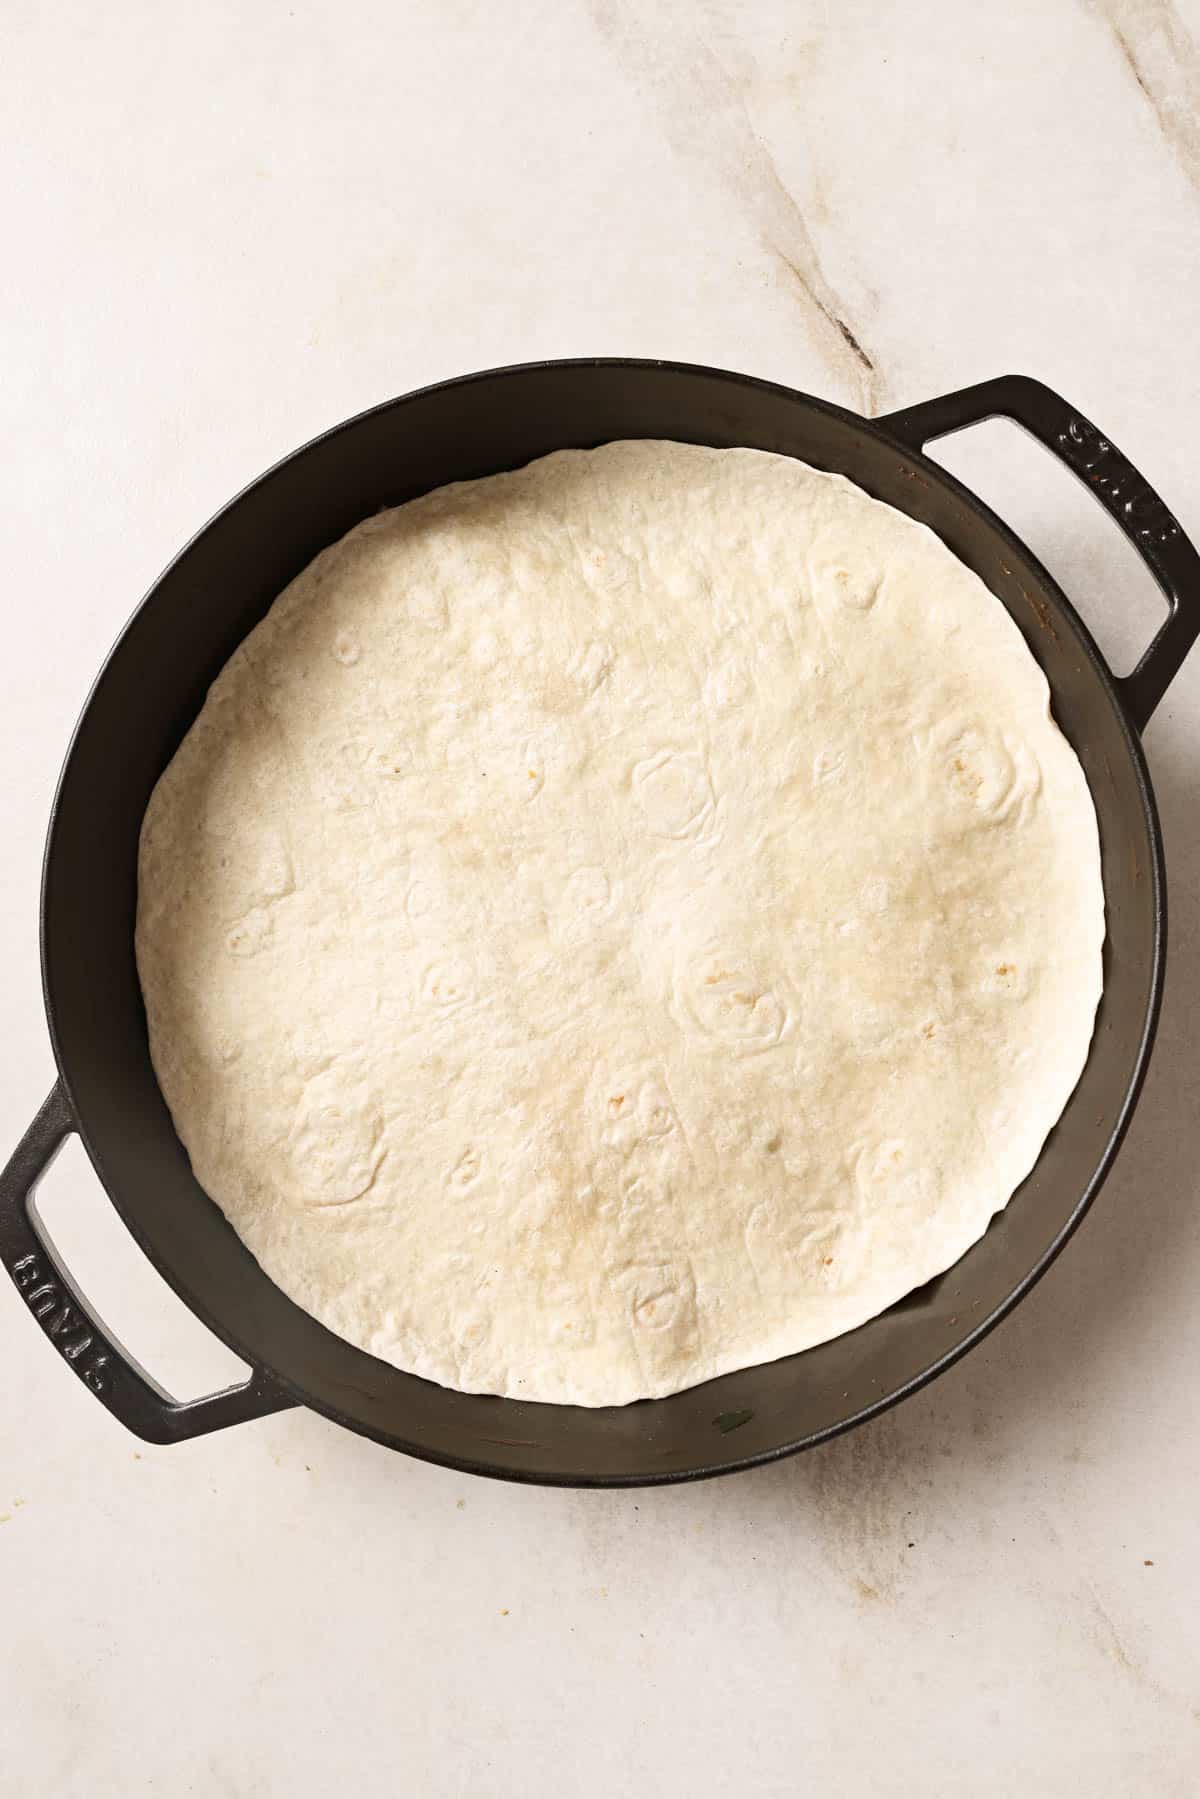 A tortilla in a cast iron pan on a marble countertop.